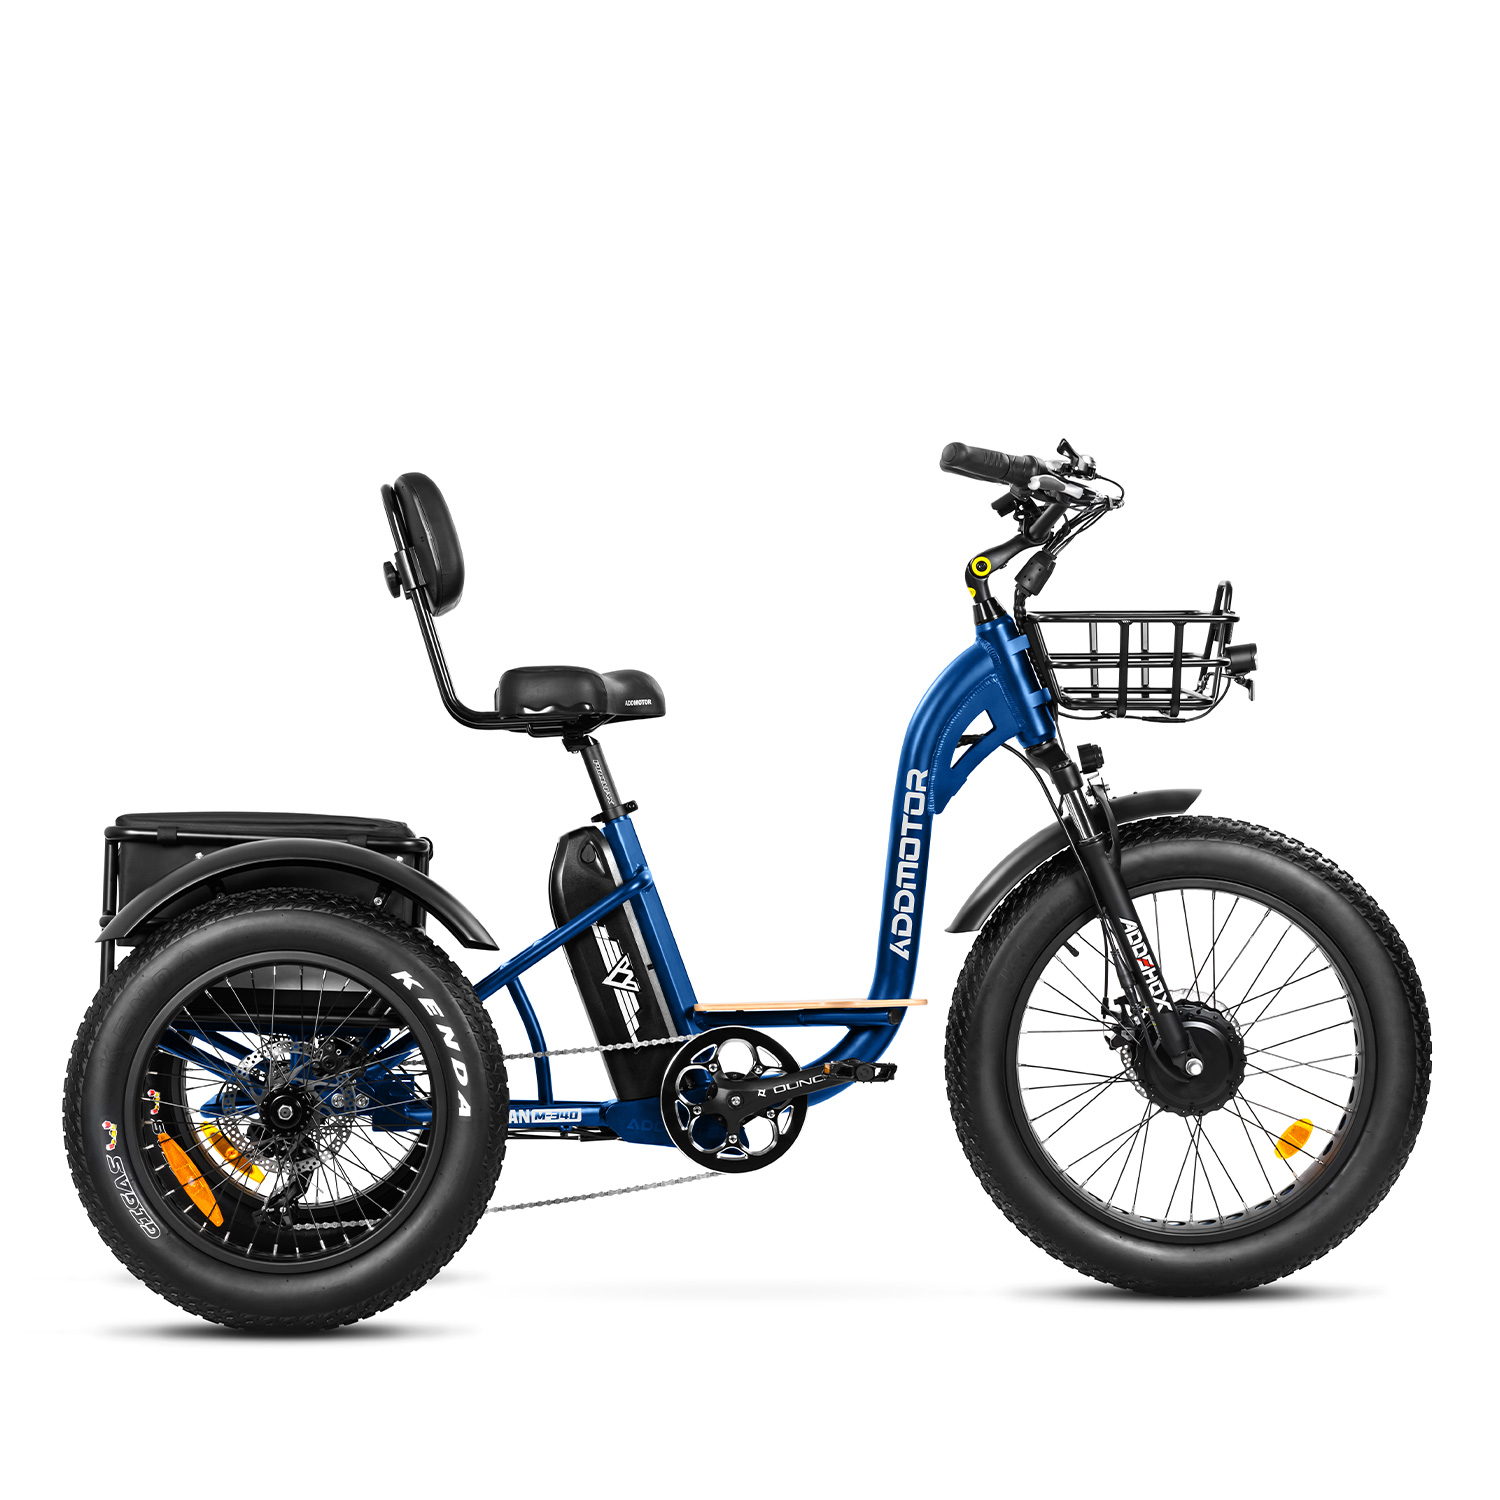 Introducing Grandtan E-Trikes: UL-Recognized Battery, Integrated Lights, and Safer Riding